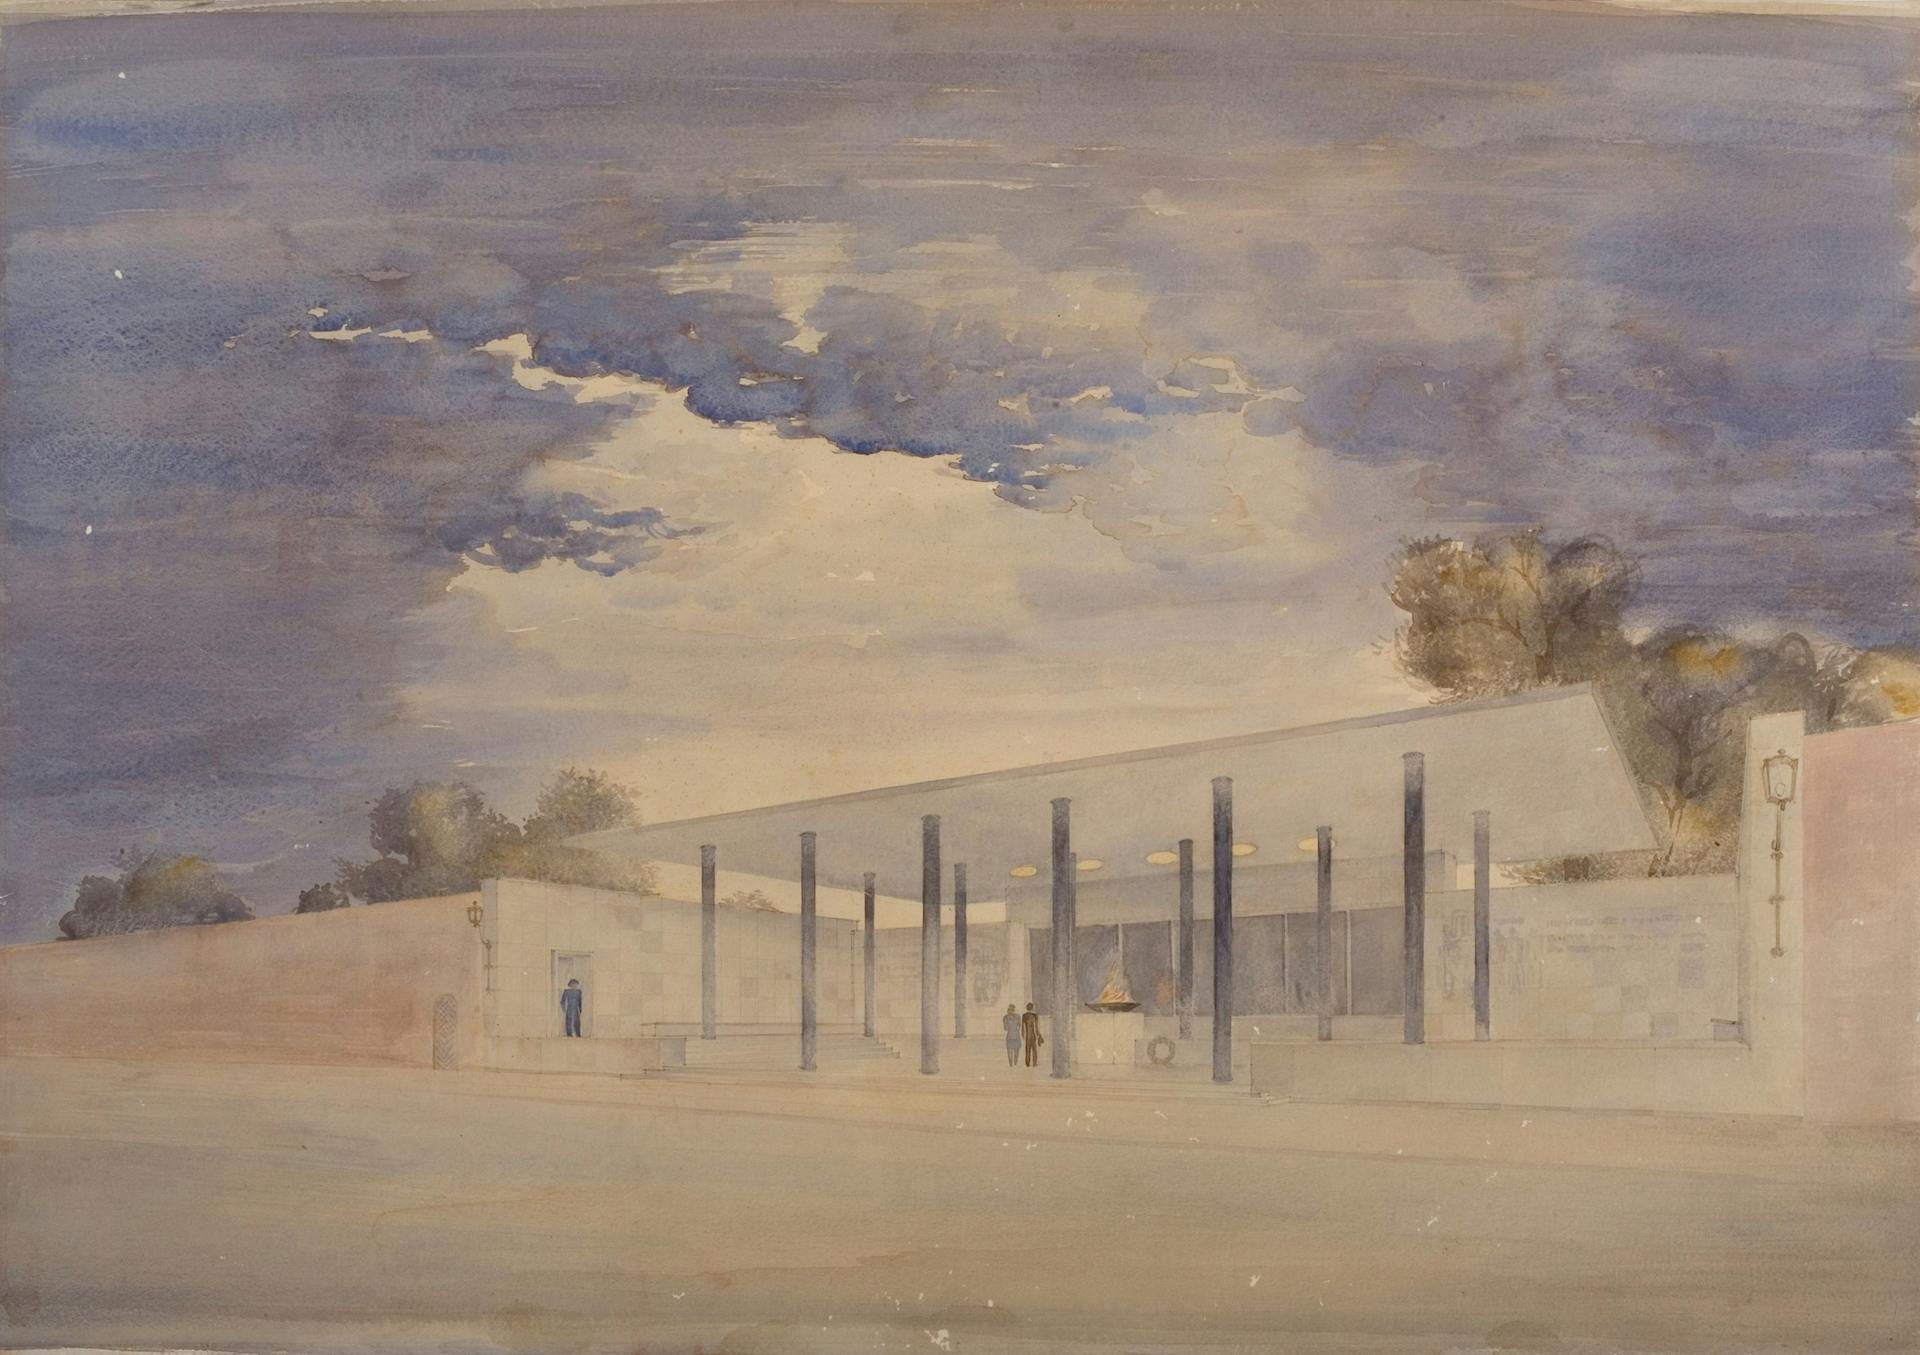  J. Wils, Monument and hall of honour for the executed, close to Scheveningen prison, 1947. Collection Het Nieuwe Instituut 